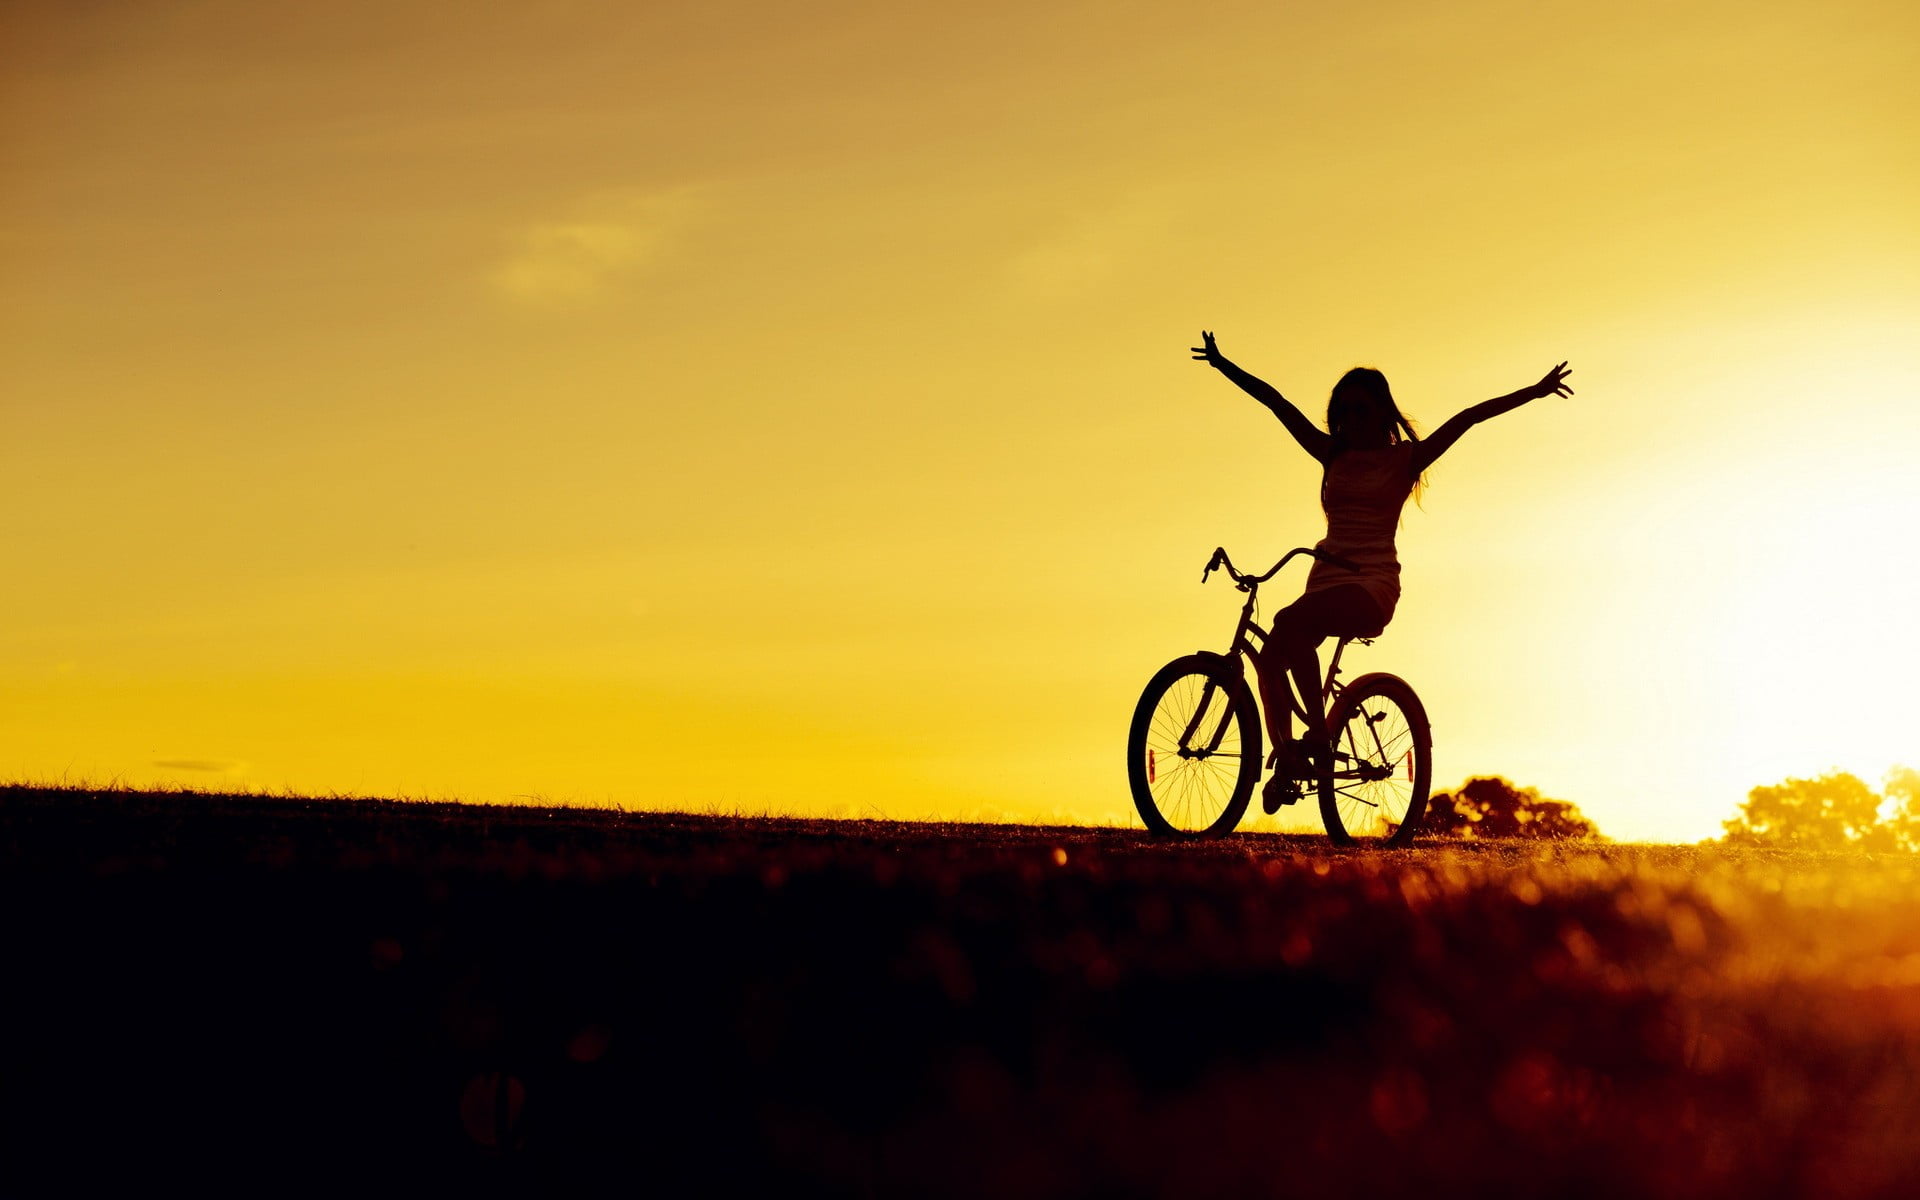 women outdoors, sunlight, emotion, bicycle, sunset, sky, silhouette